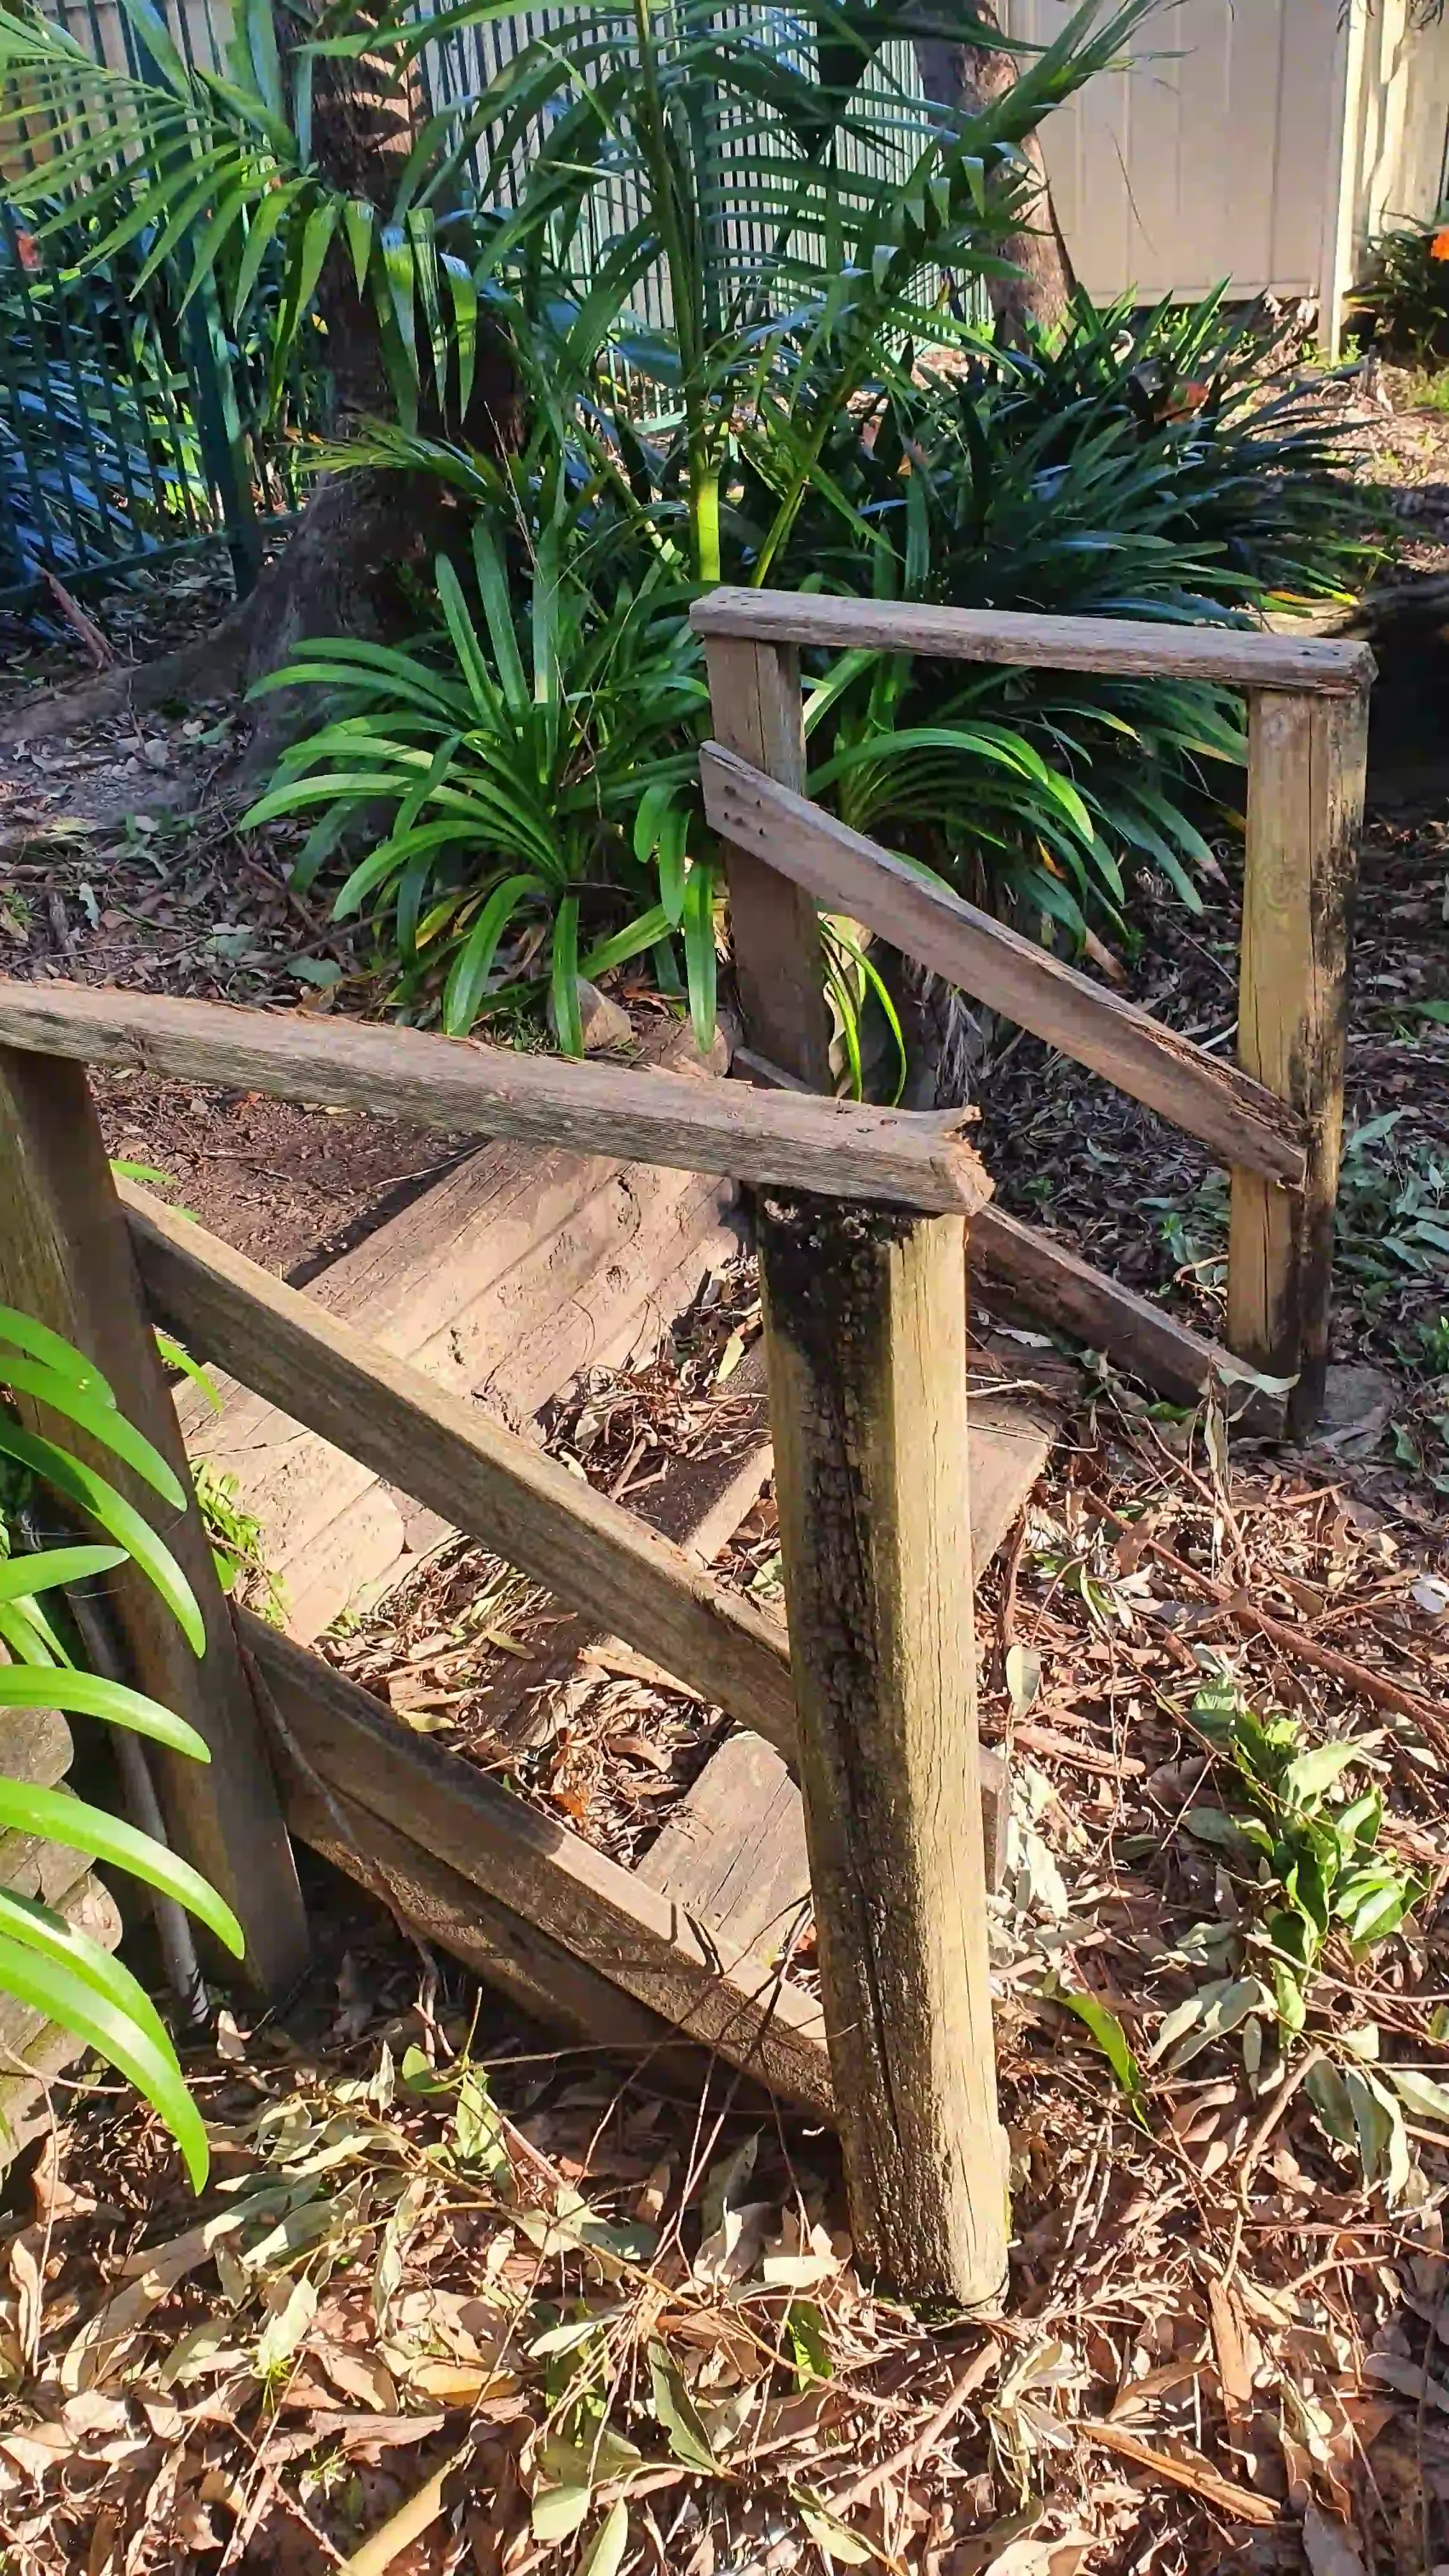 SP52948-unsafe-gardens-without-railings-behind-townhouses-photo-12-7Jun2022